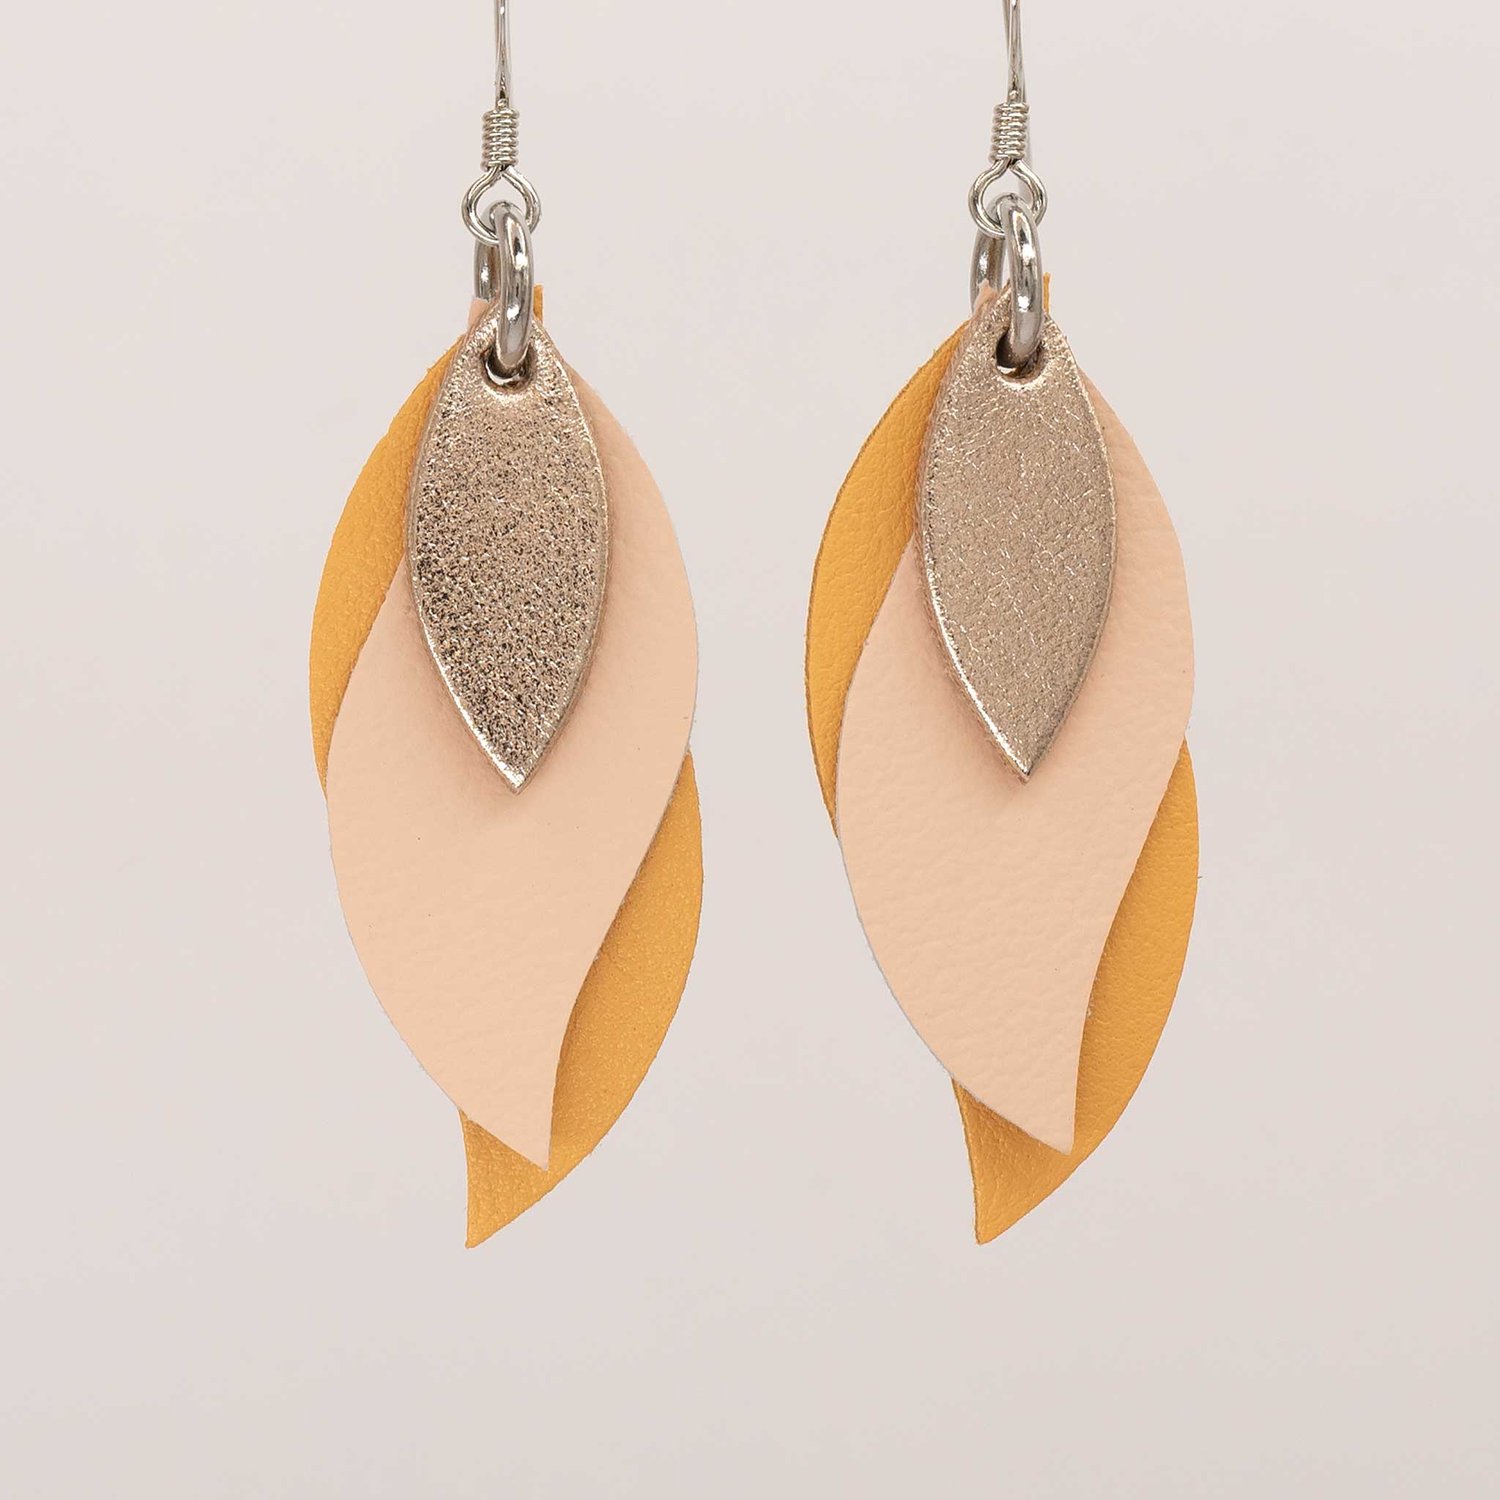 Image of Handmade Australian leather leaf earrings - Rose gold, pale peach, soft apricot [LRP-542]